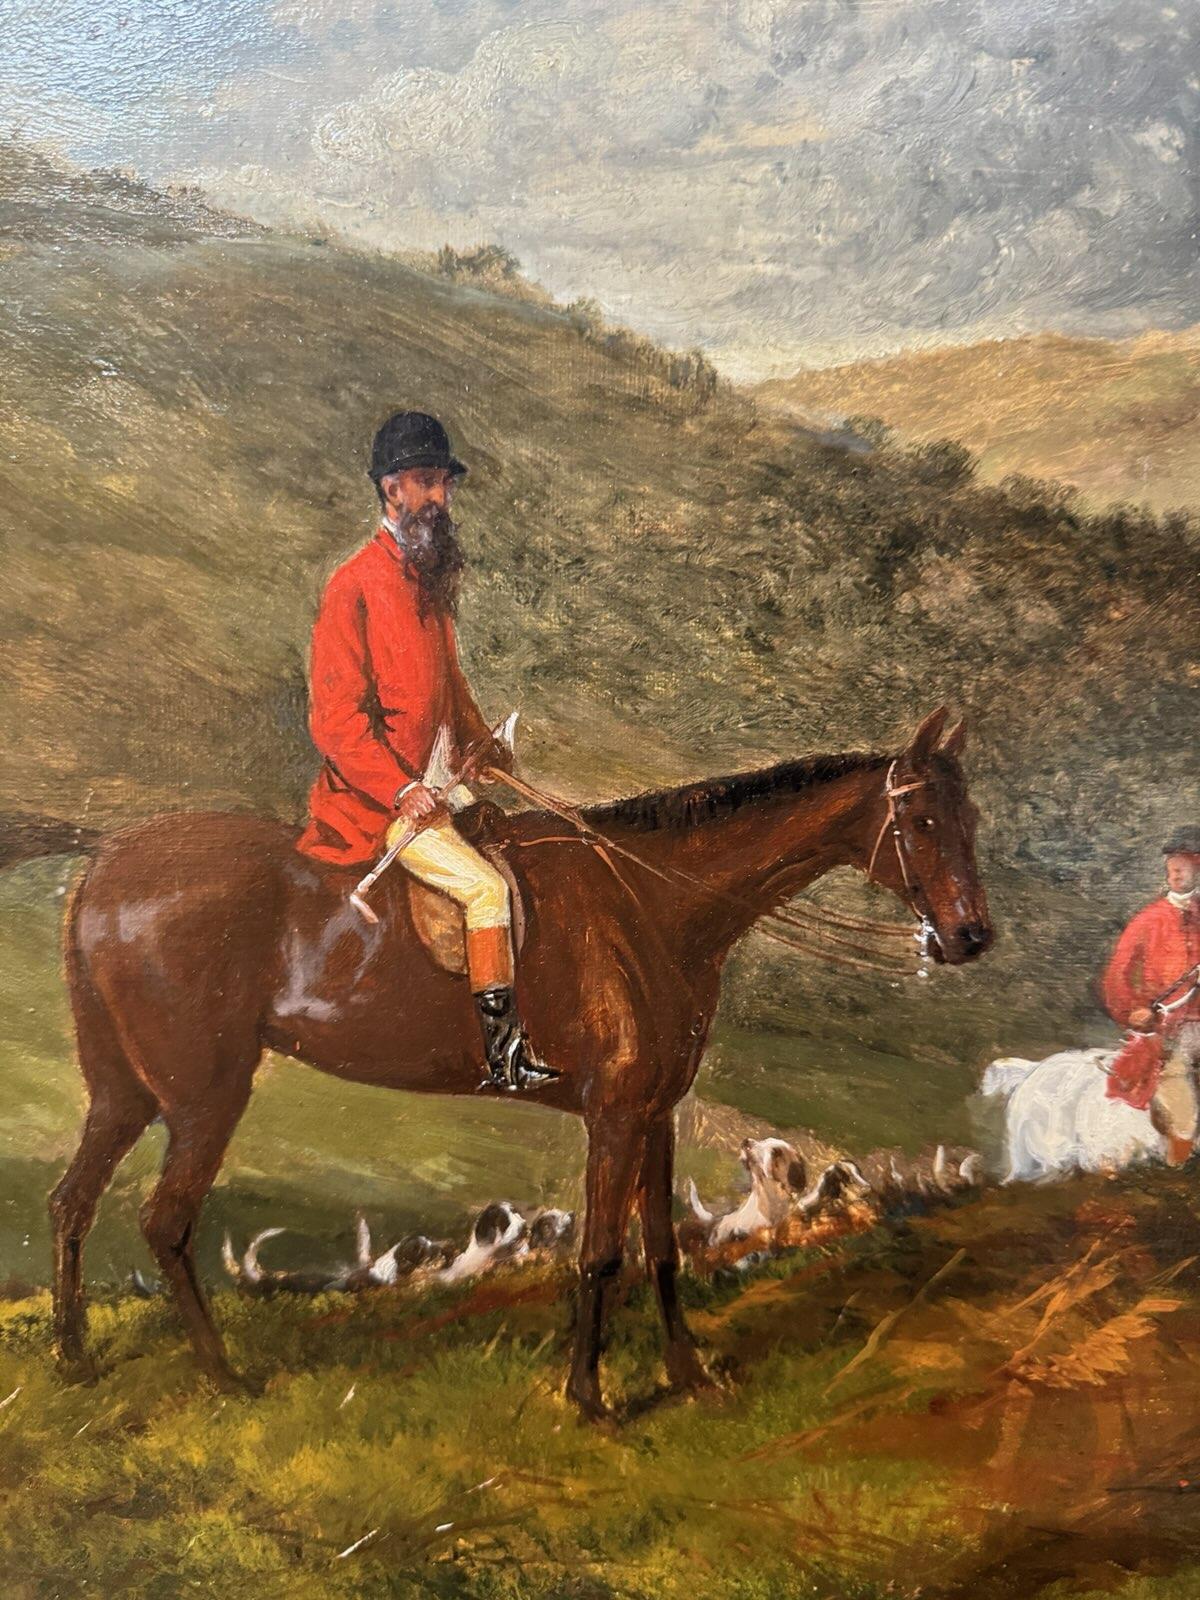 Late 19th Century Oil Painting Depicting Fox Hunt by George Earl. Lovely painting with regal man on horseback in his red hunt coat with hounds and hills behind. England, 1870-1900. Measures: 18